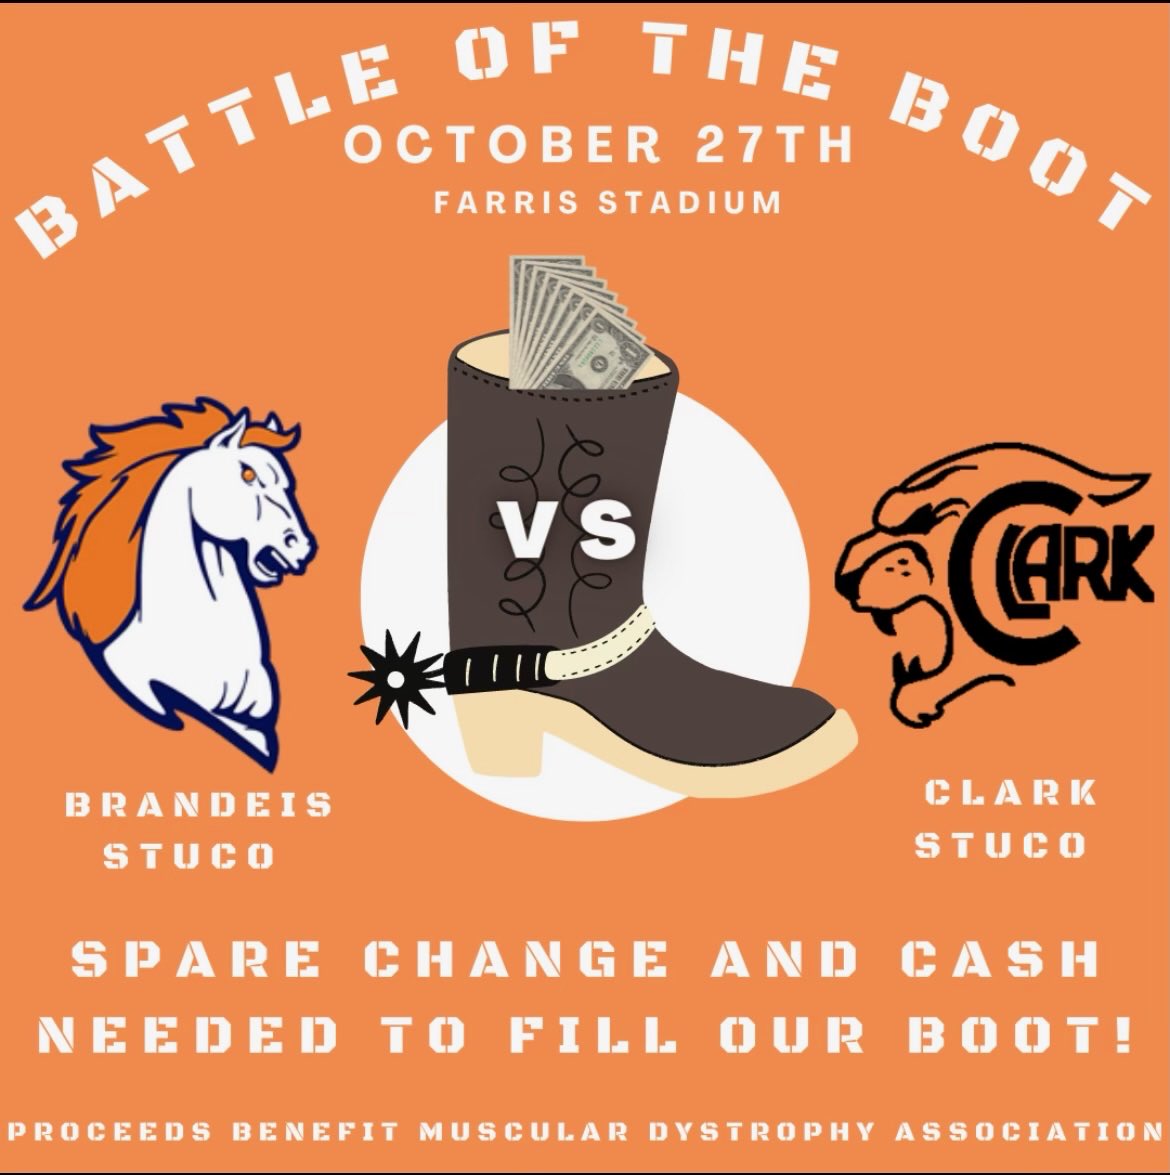 BATTLE OF THE BOOT During todays football game against Brandeis, our schools are challenging each other to see who can fill the boot the most with loose change or spare cash! We will be located outside the gate and all proceeds benefit muscular dystrophy association!!